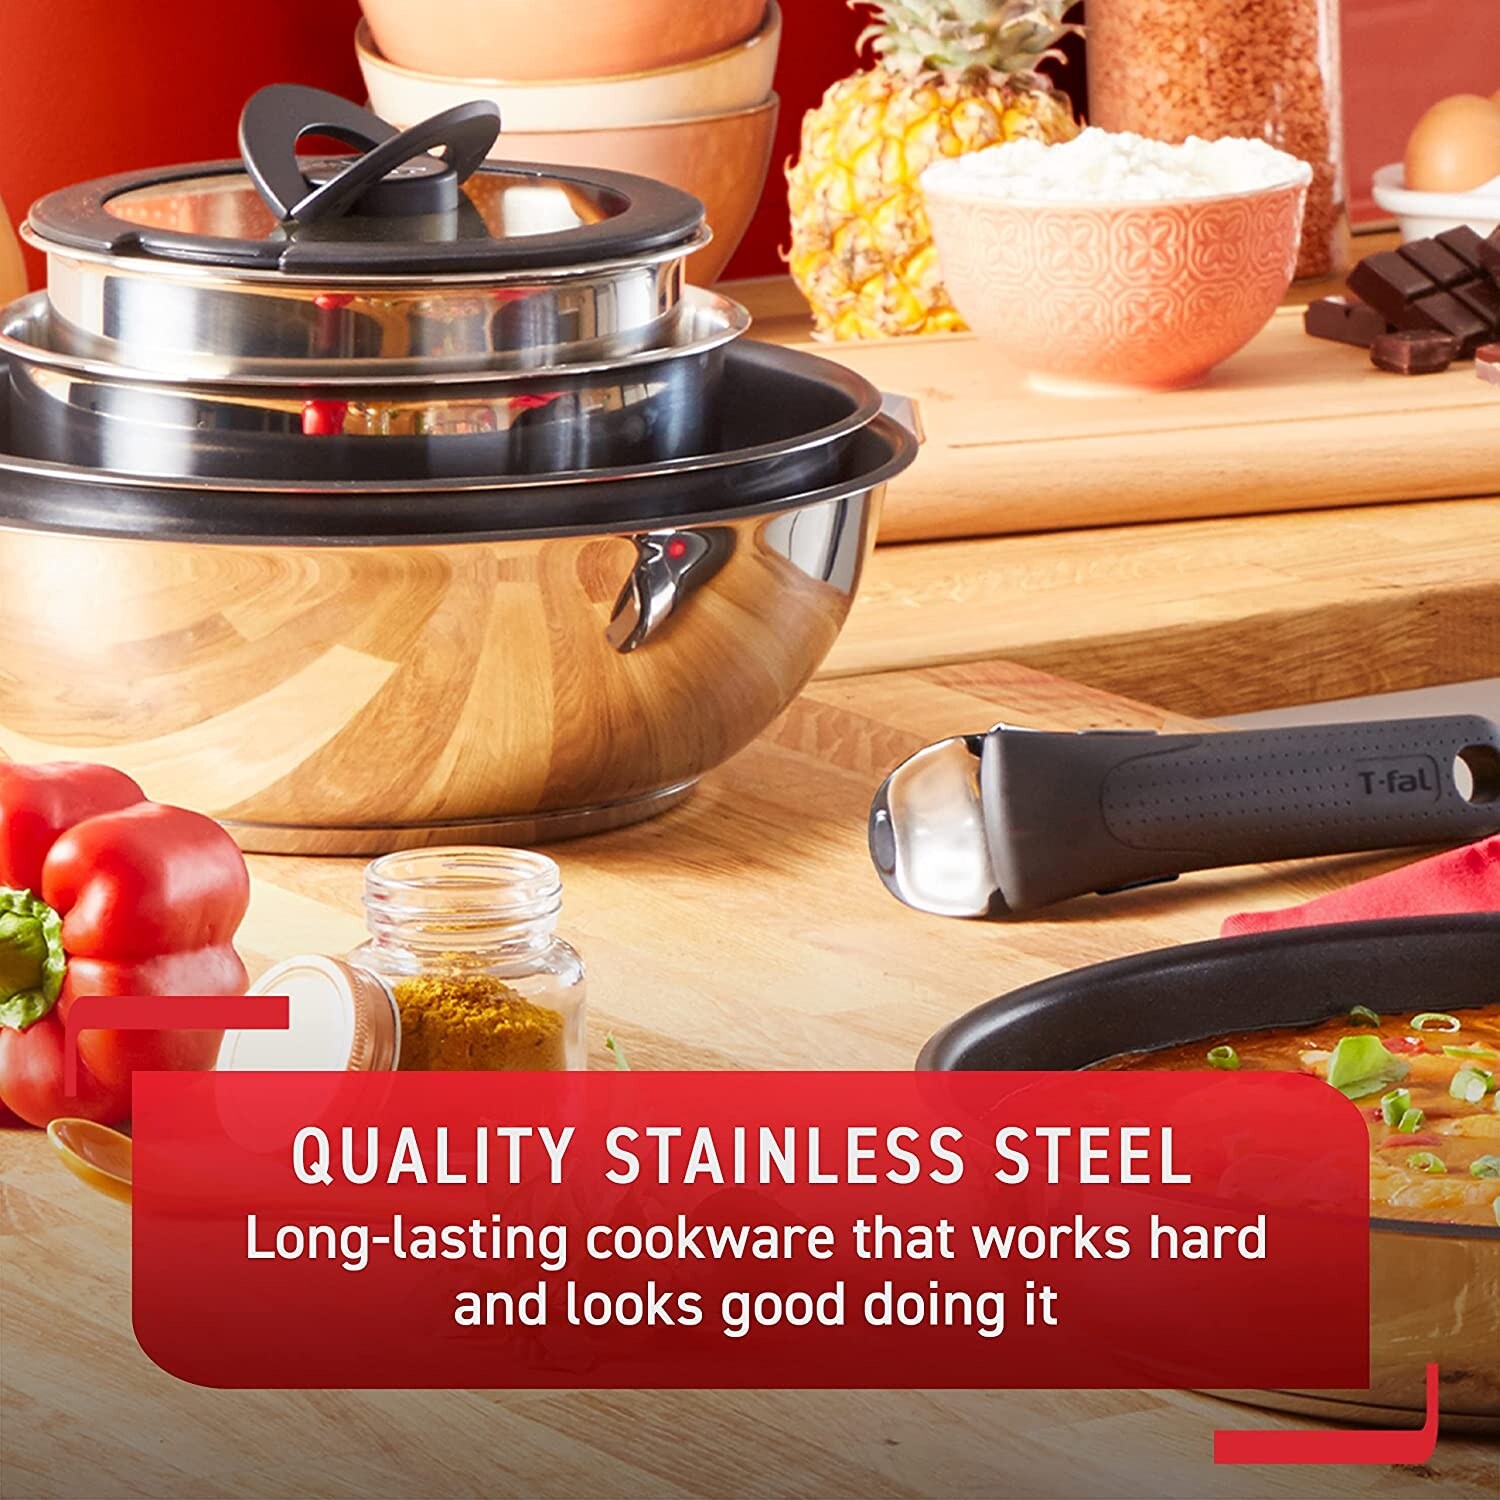 https://ak1.ostkcdn.com/images/products/is/images/direct/d1ce1837ef7c2ea65f65db01672803ef634dbff2/Ingenio-Stainless-Steel-Cookware-Set-4-Piece-Induction-Stackable%2C-Removable-Handle-Pots-and-Pans%2C-Dishwasher-Safe-Silver.jpg